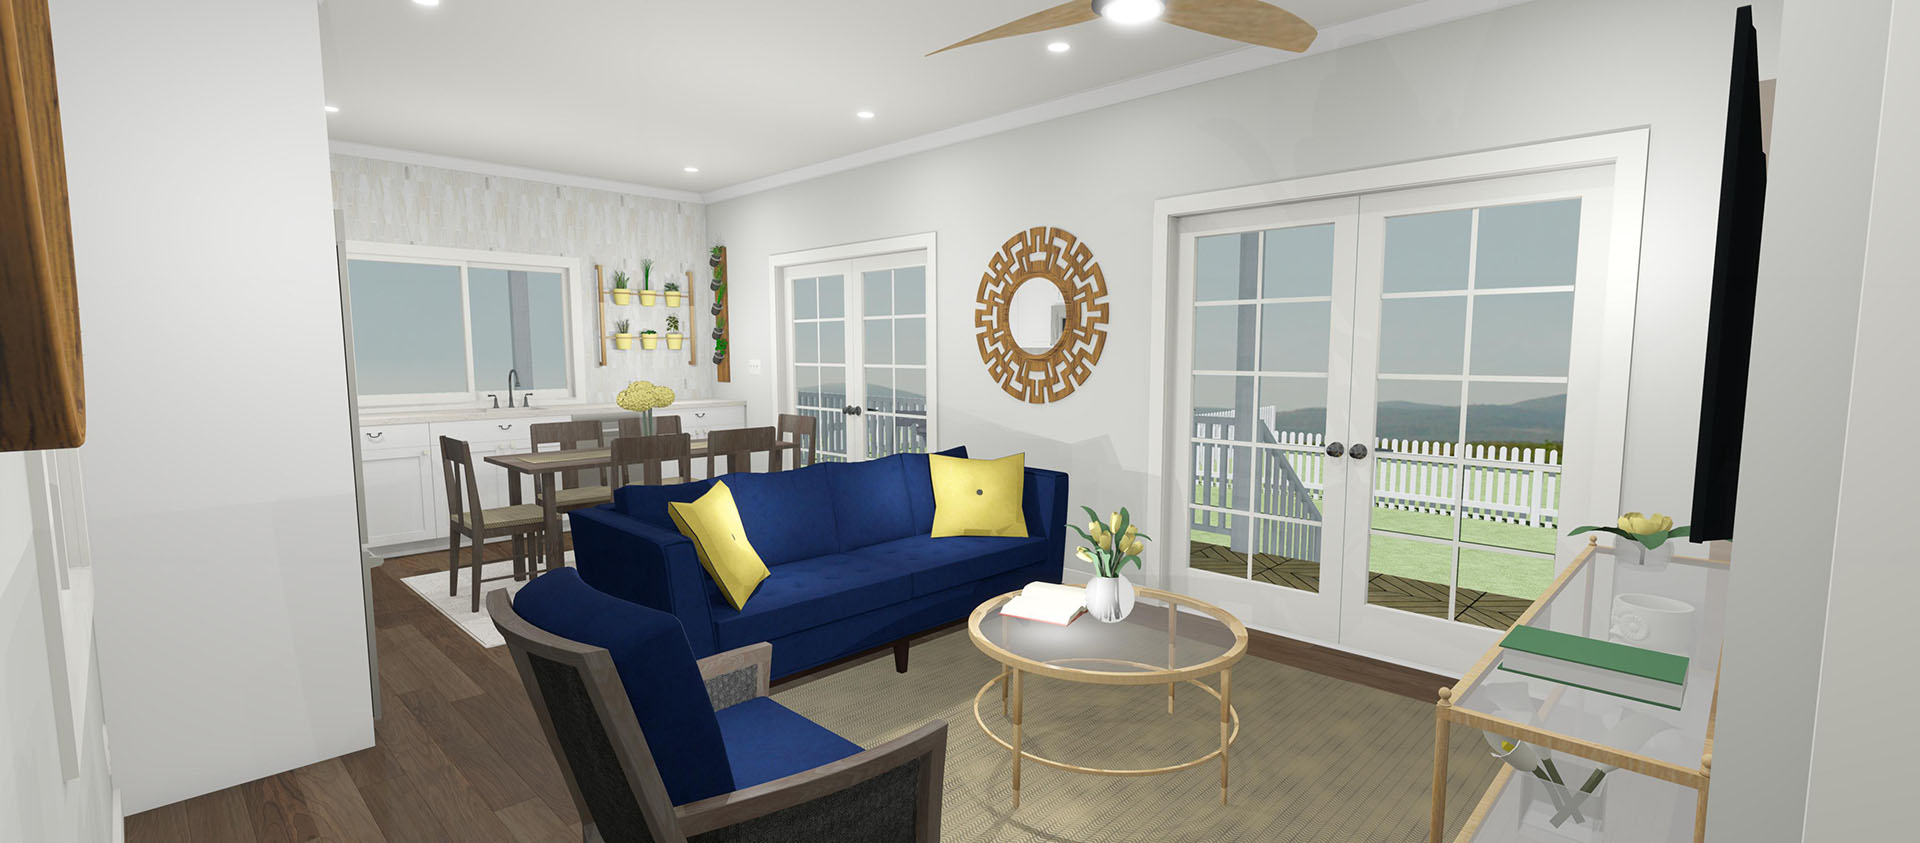 Living room with two blue sofas and wooden dining table